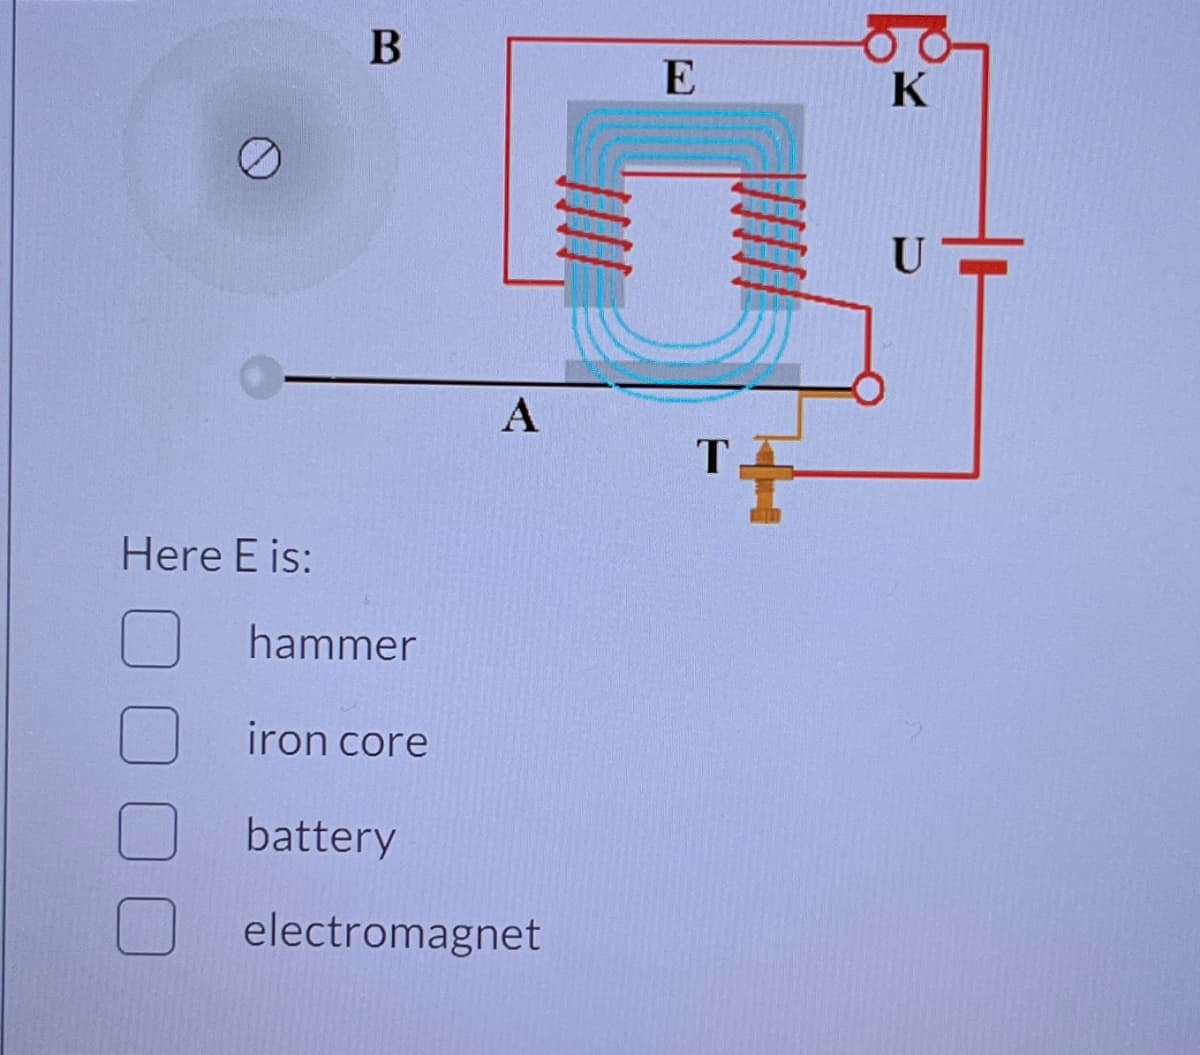 Here E is:
B
hammer
iron core
battery
A
electromagnet
E
T
K